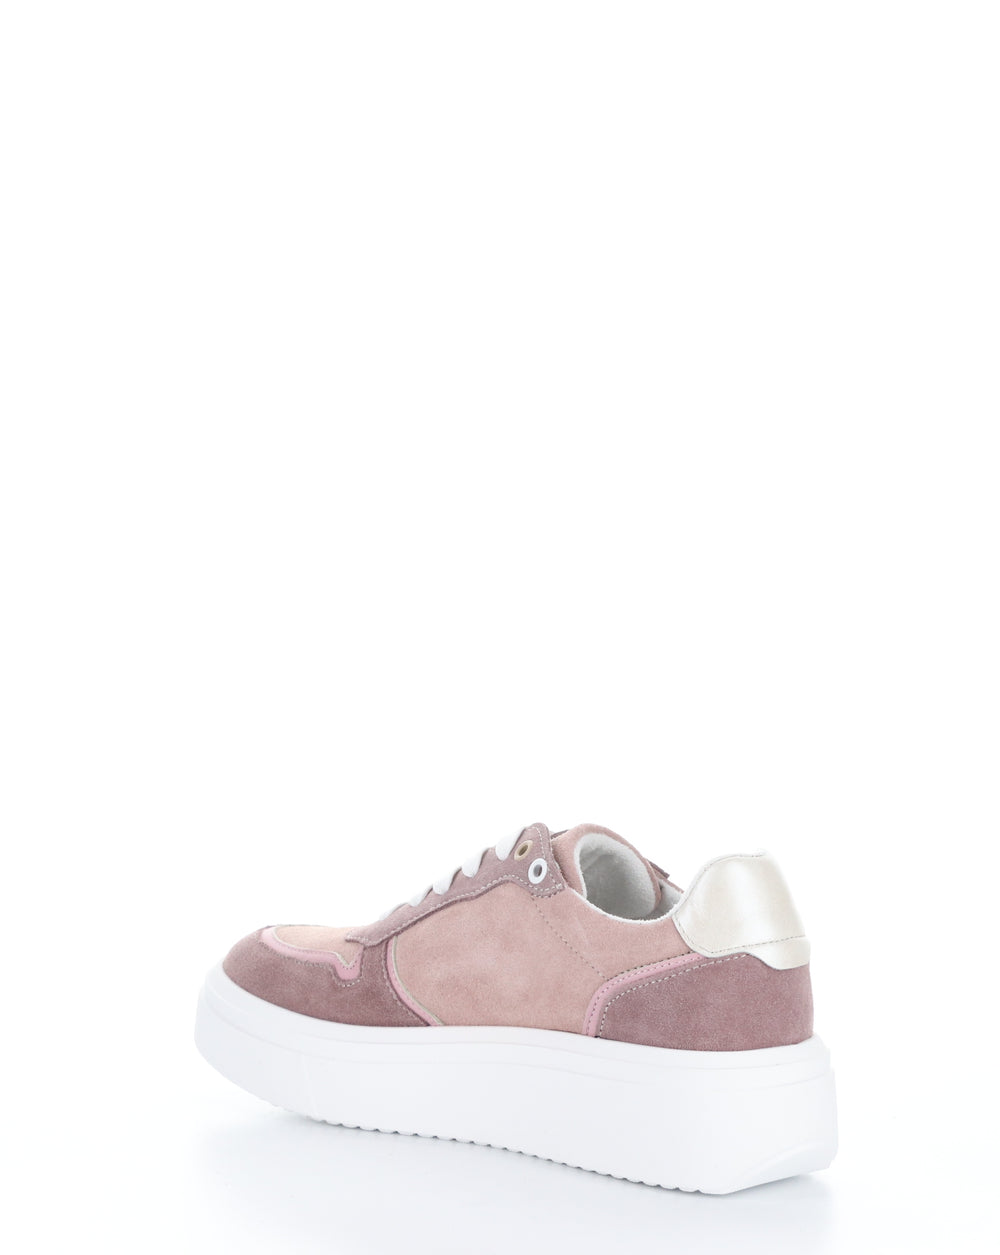 FULTON OLD ROSE Lace-up Shoes